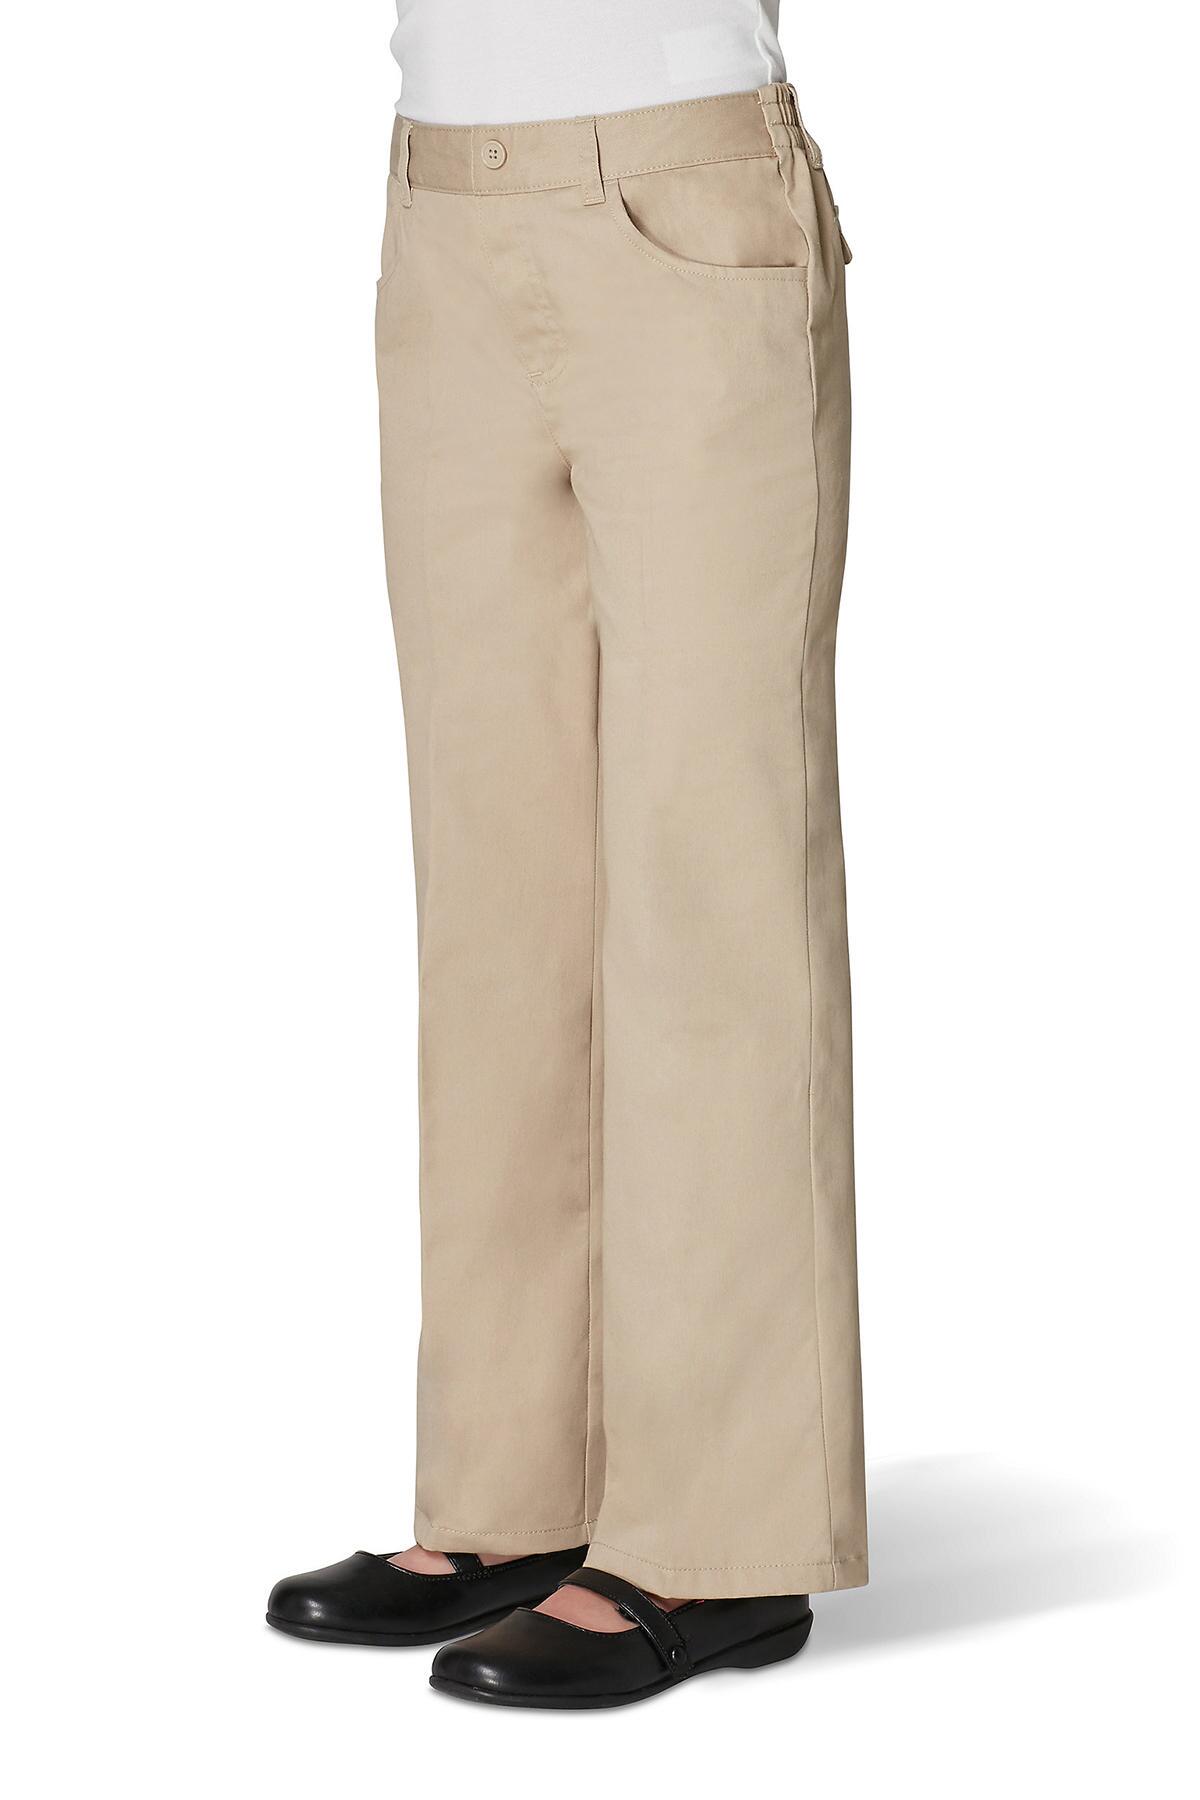 French Toast Girls Pull-On Twill Pant